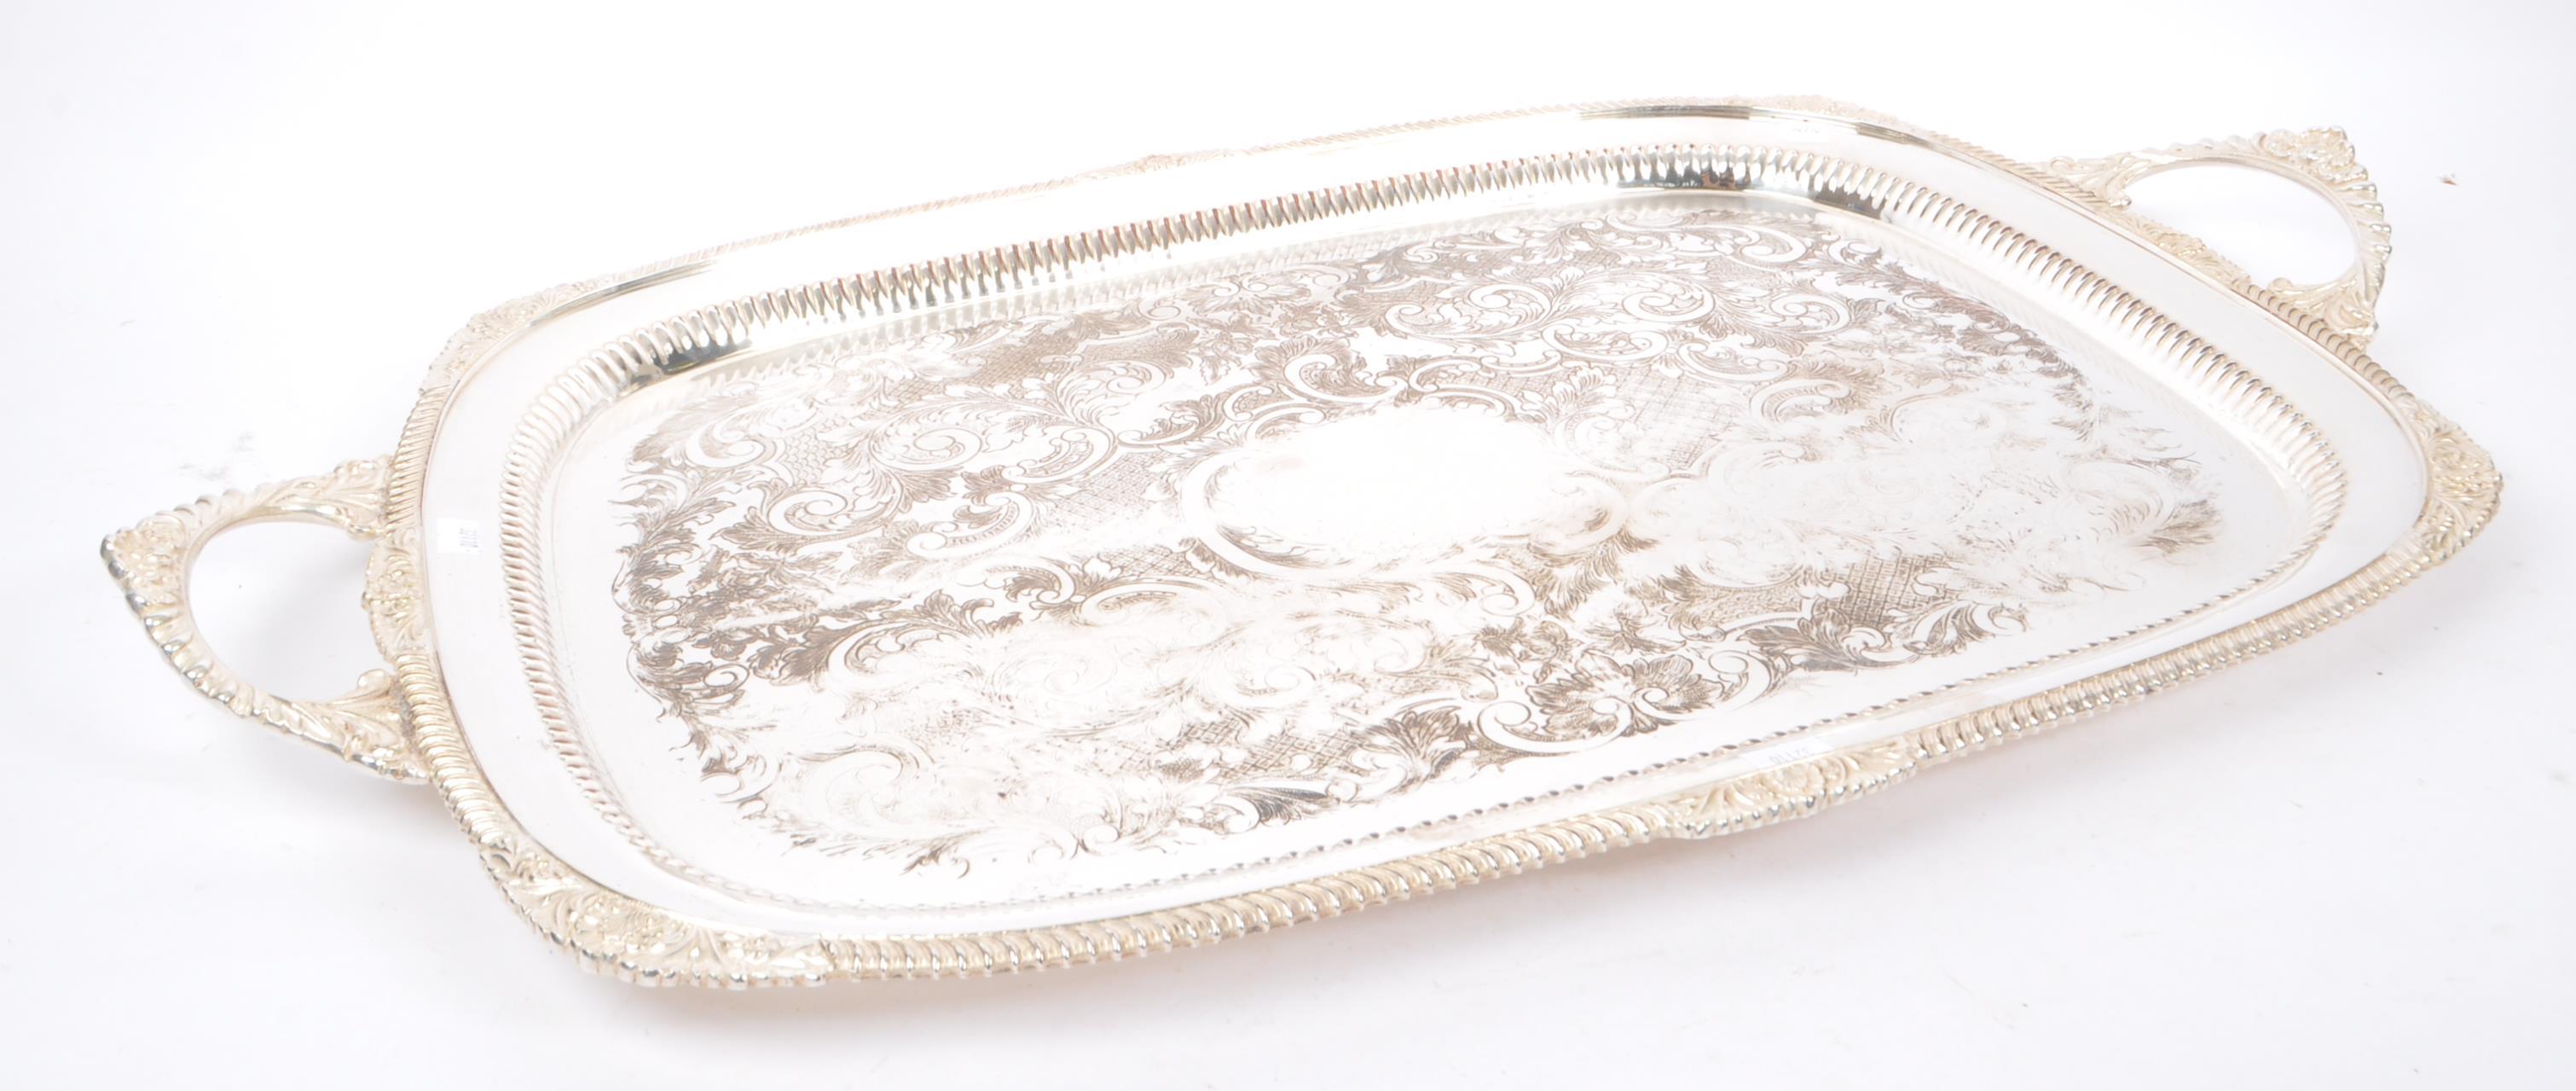 POSTON PRODUCTS LTD LONSDALE SILVER PLATE TRAY - Image 5 of 8